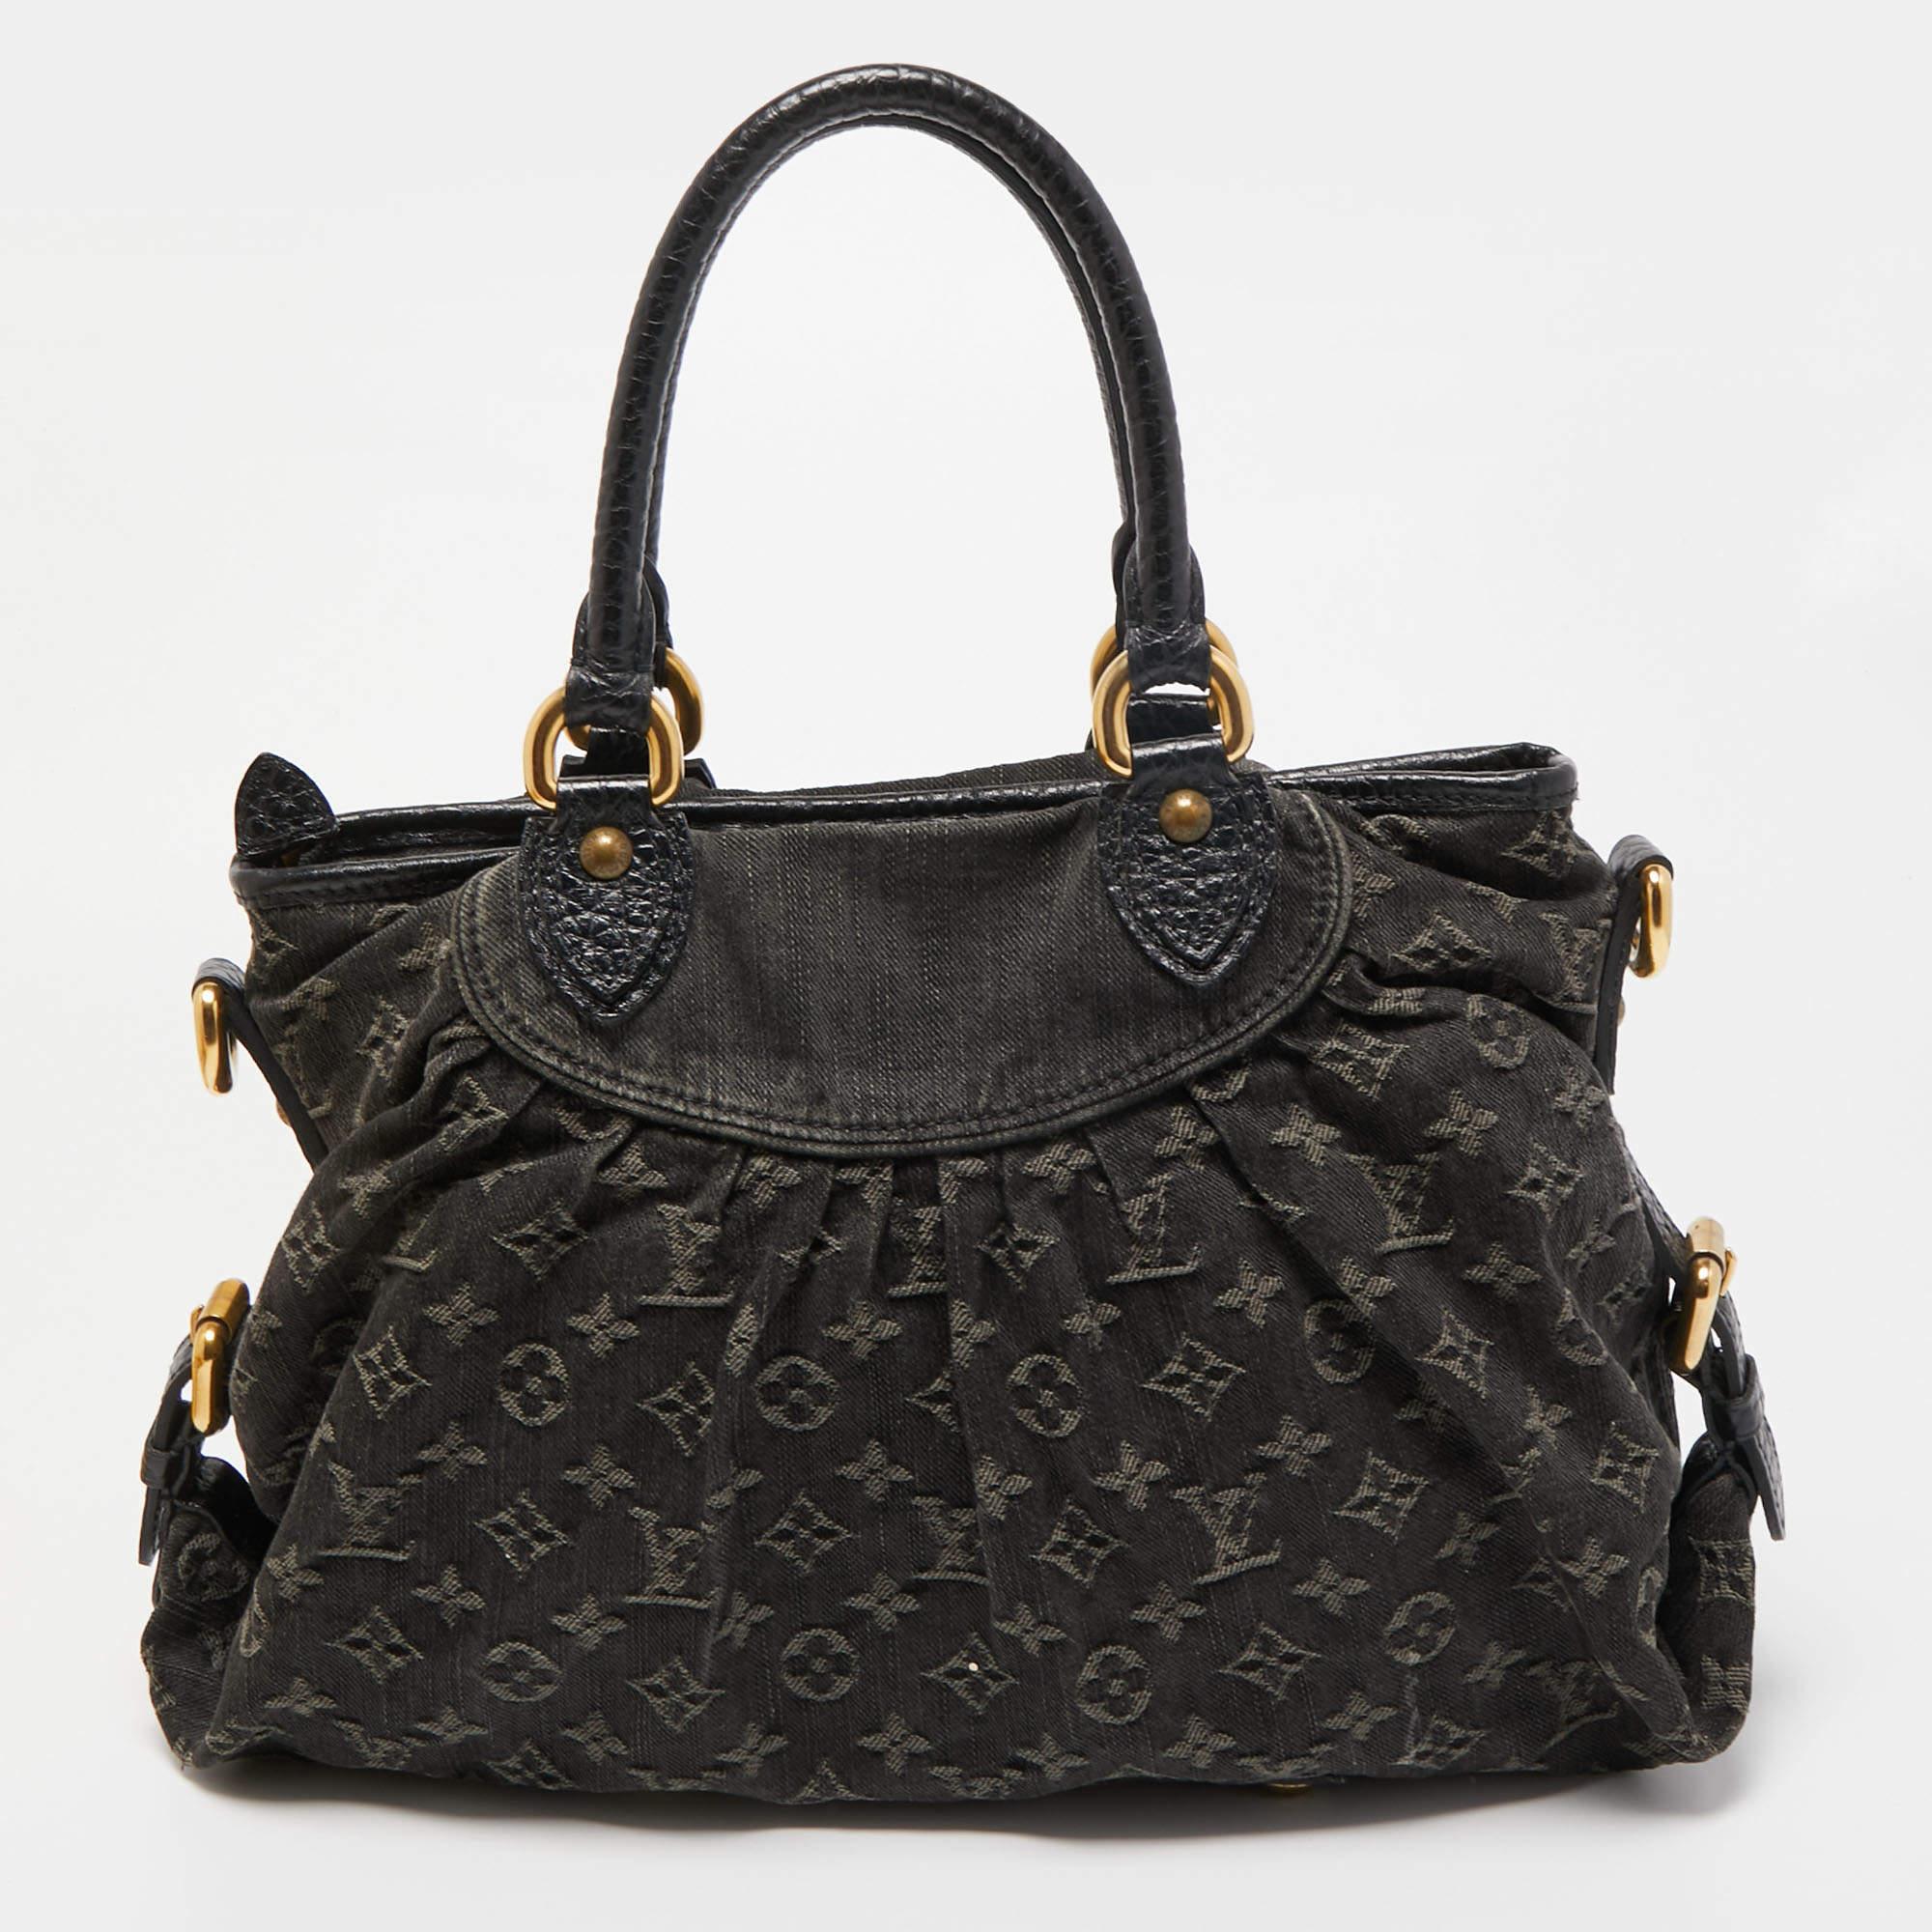 Louis Vuitton's handbags rank high in style and craftsmanship, making them valuable creations of luxury. This Neo Cabby bag, like all the other handbags, is durable and stylish. Crafted from black Monogram denim and leather, the bag is perfectly